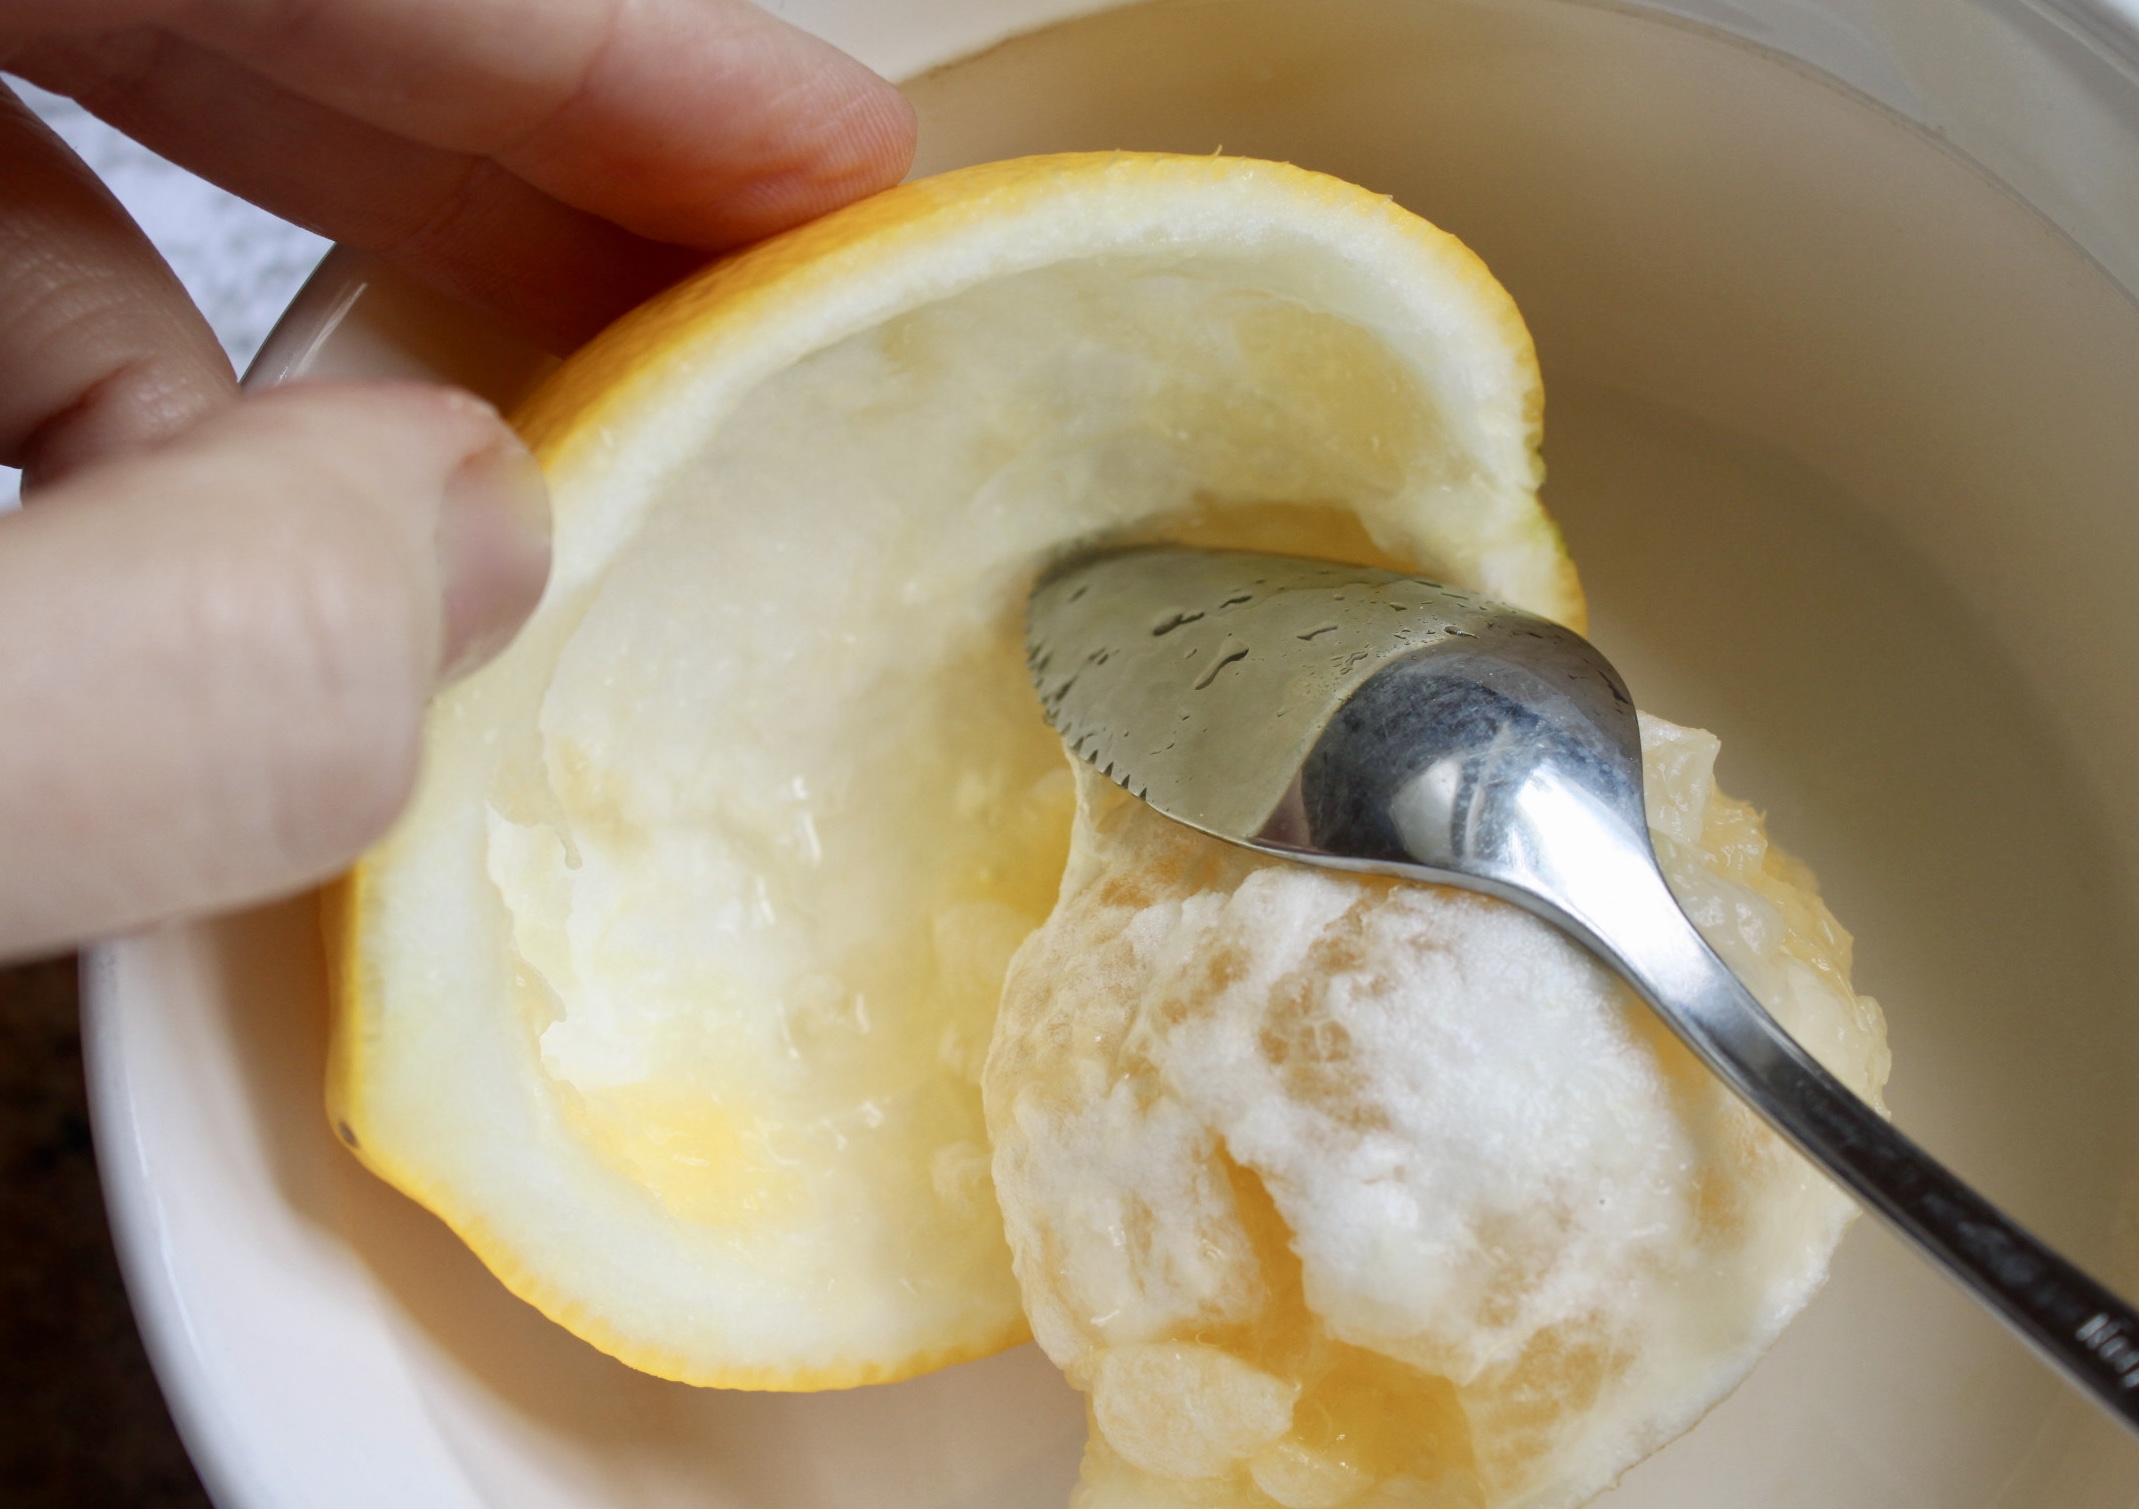 scooping out the flesh of a citrus fruit